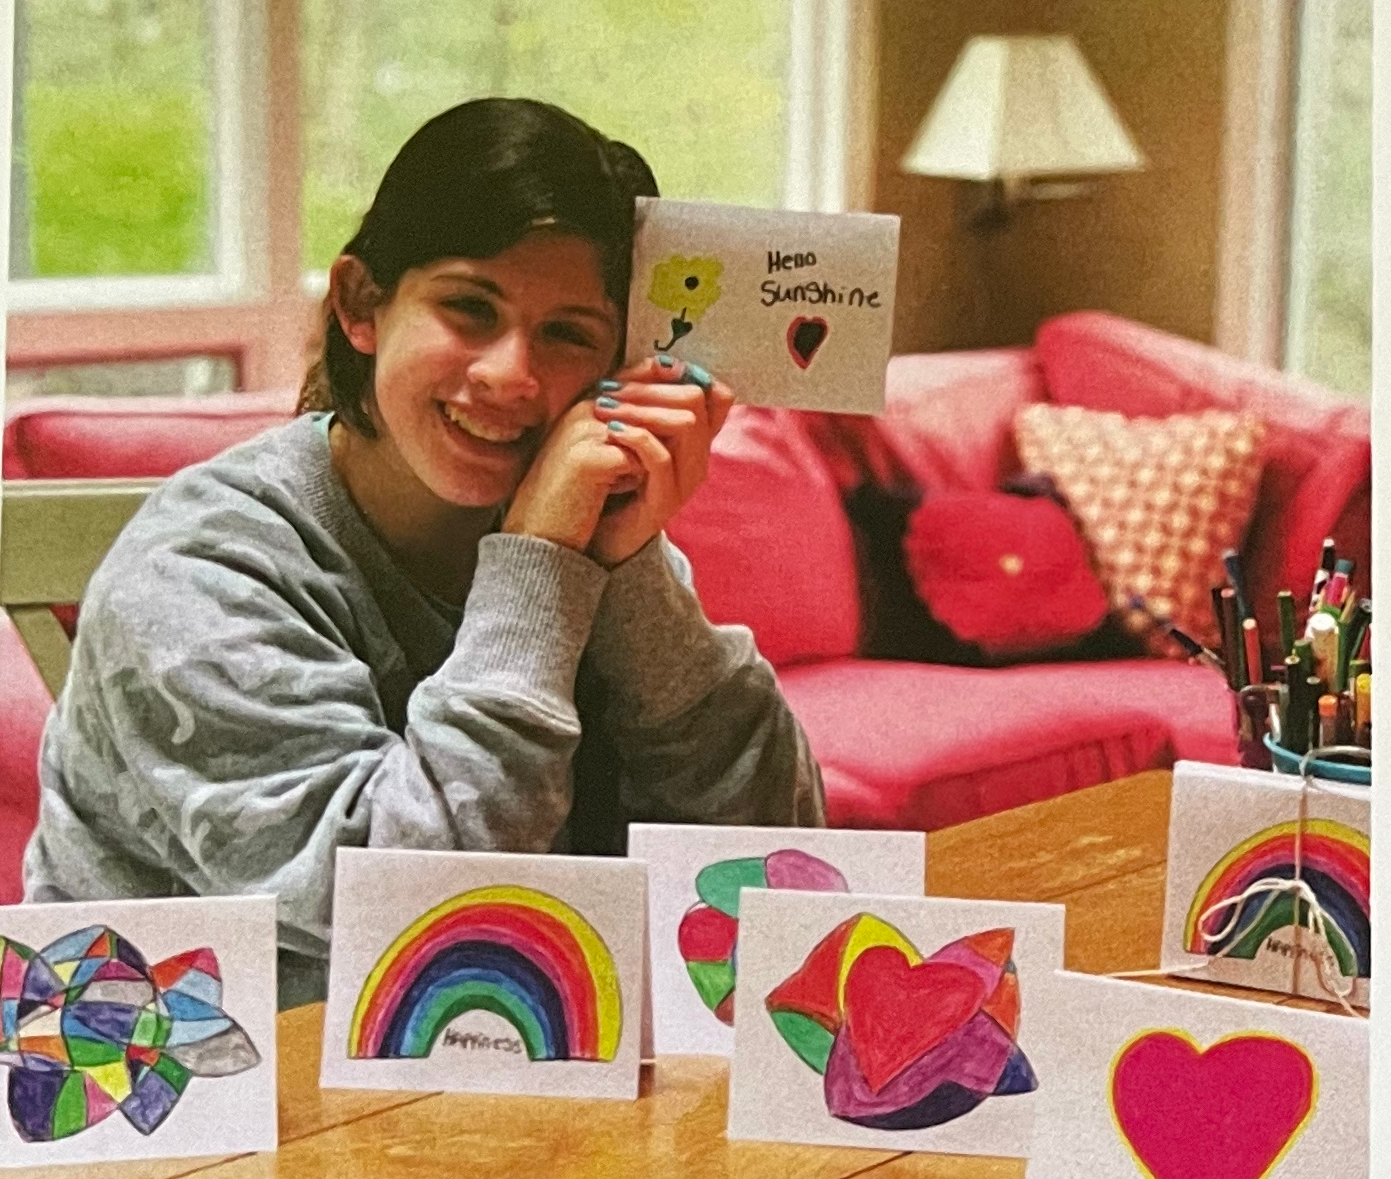 Artist pictured with a display of her drawings made into art cards